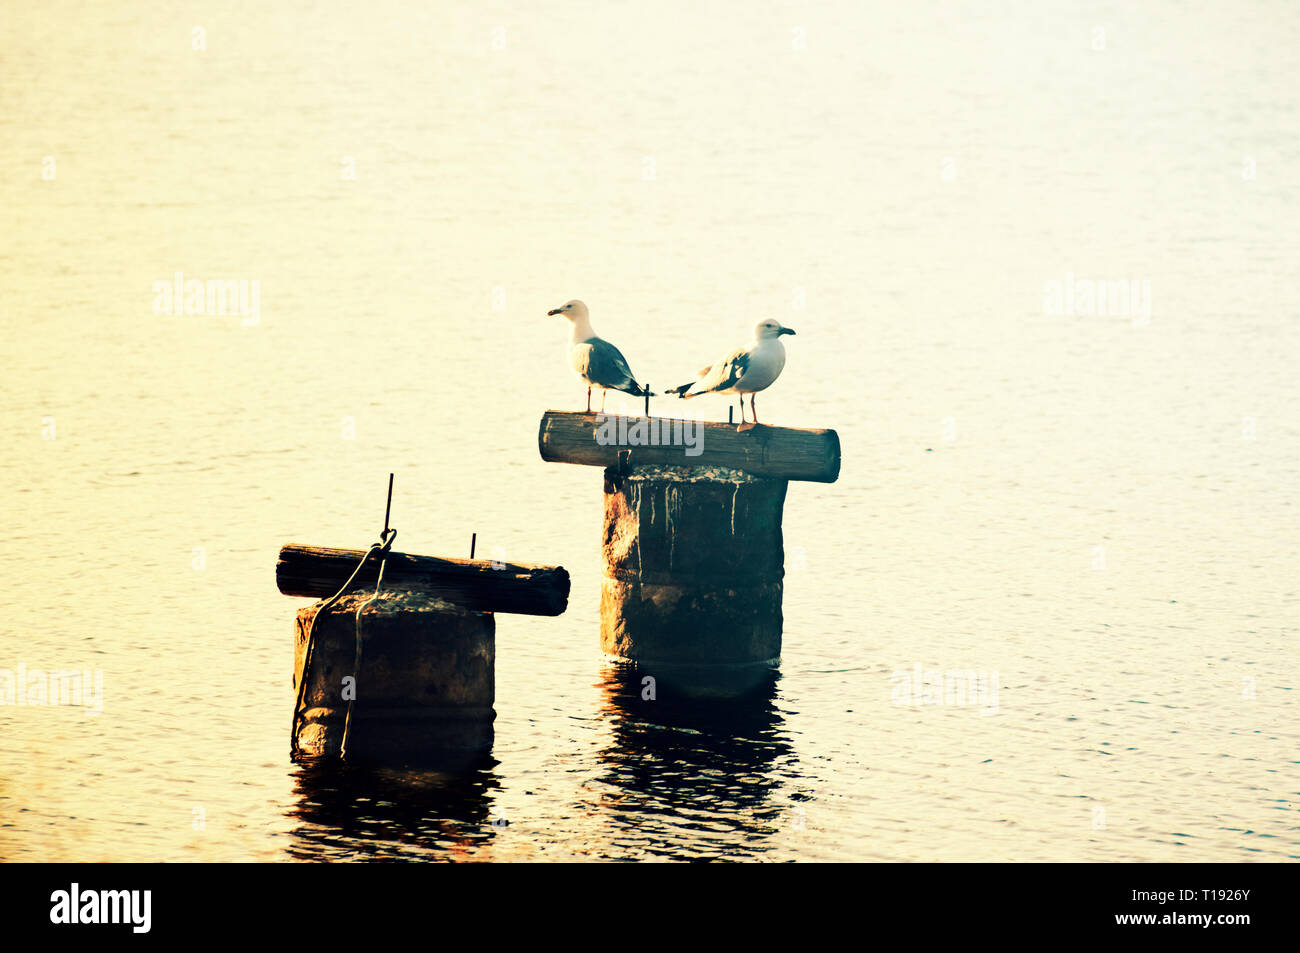 Two seagulls standing on the remains of a jetty Stock Photo